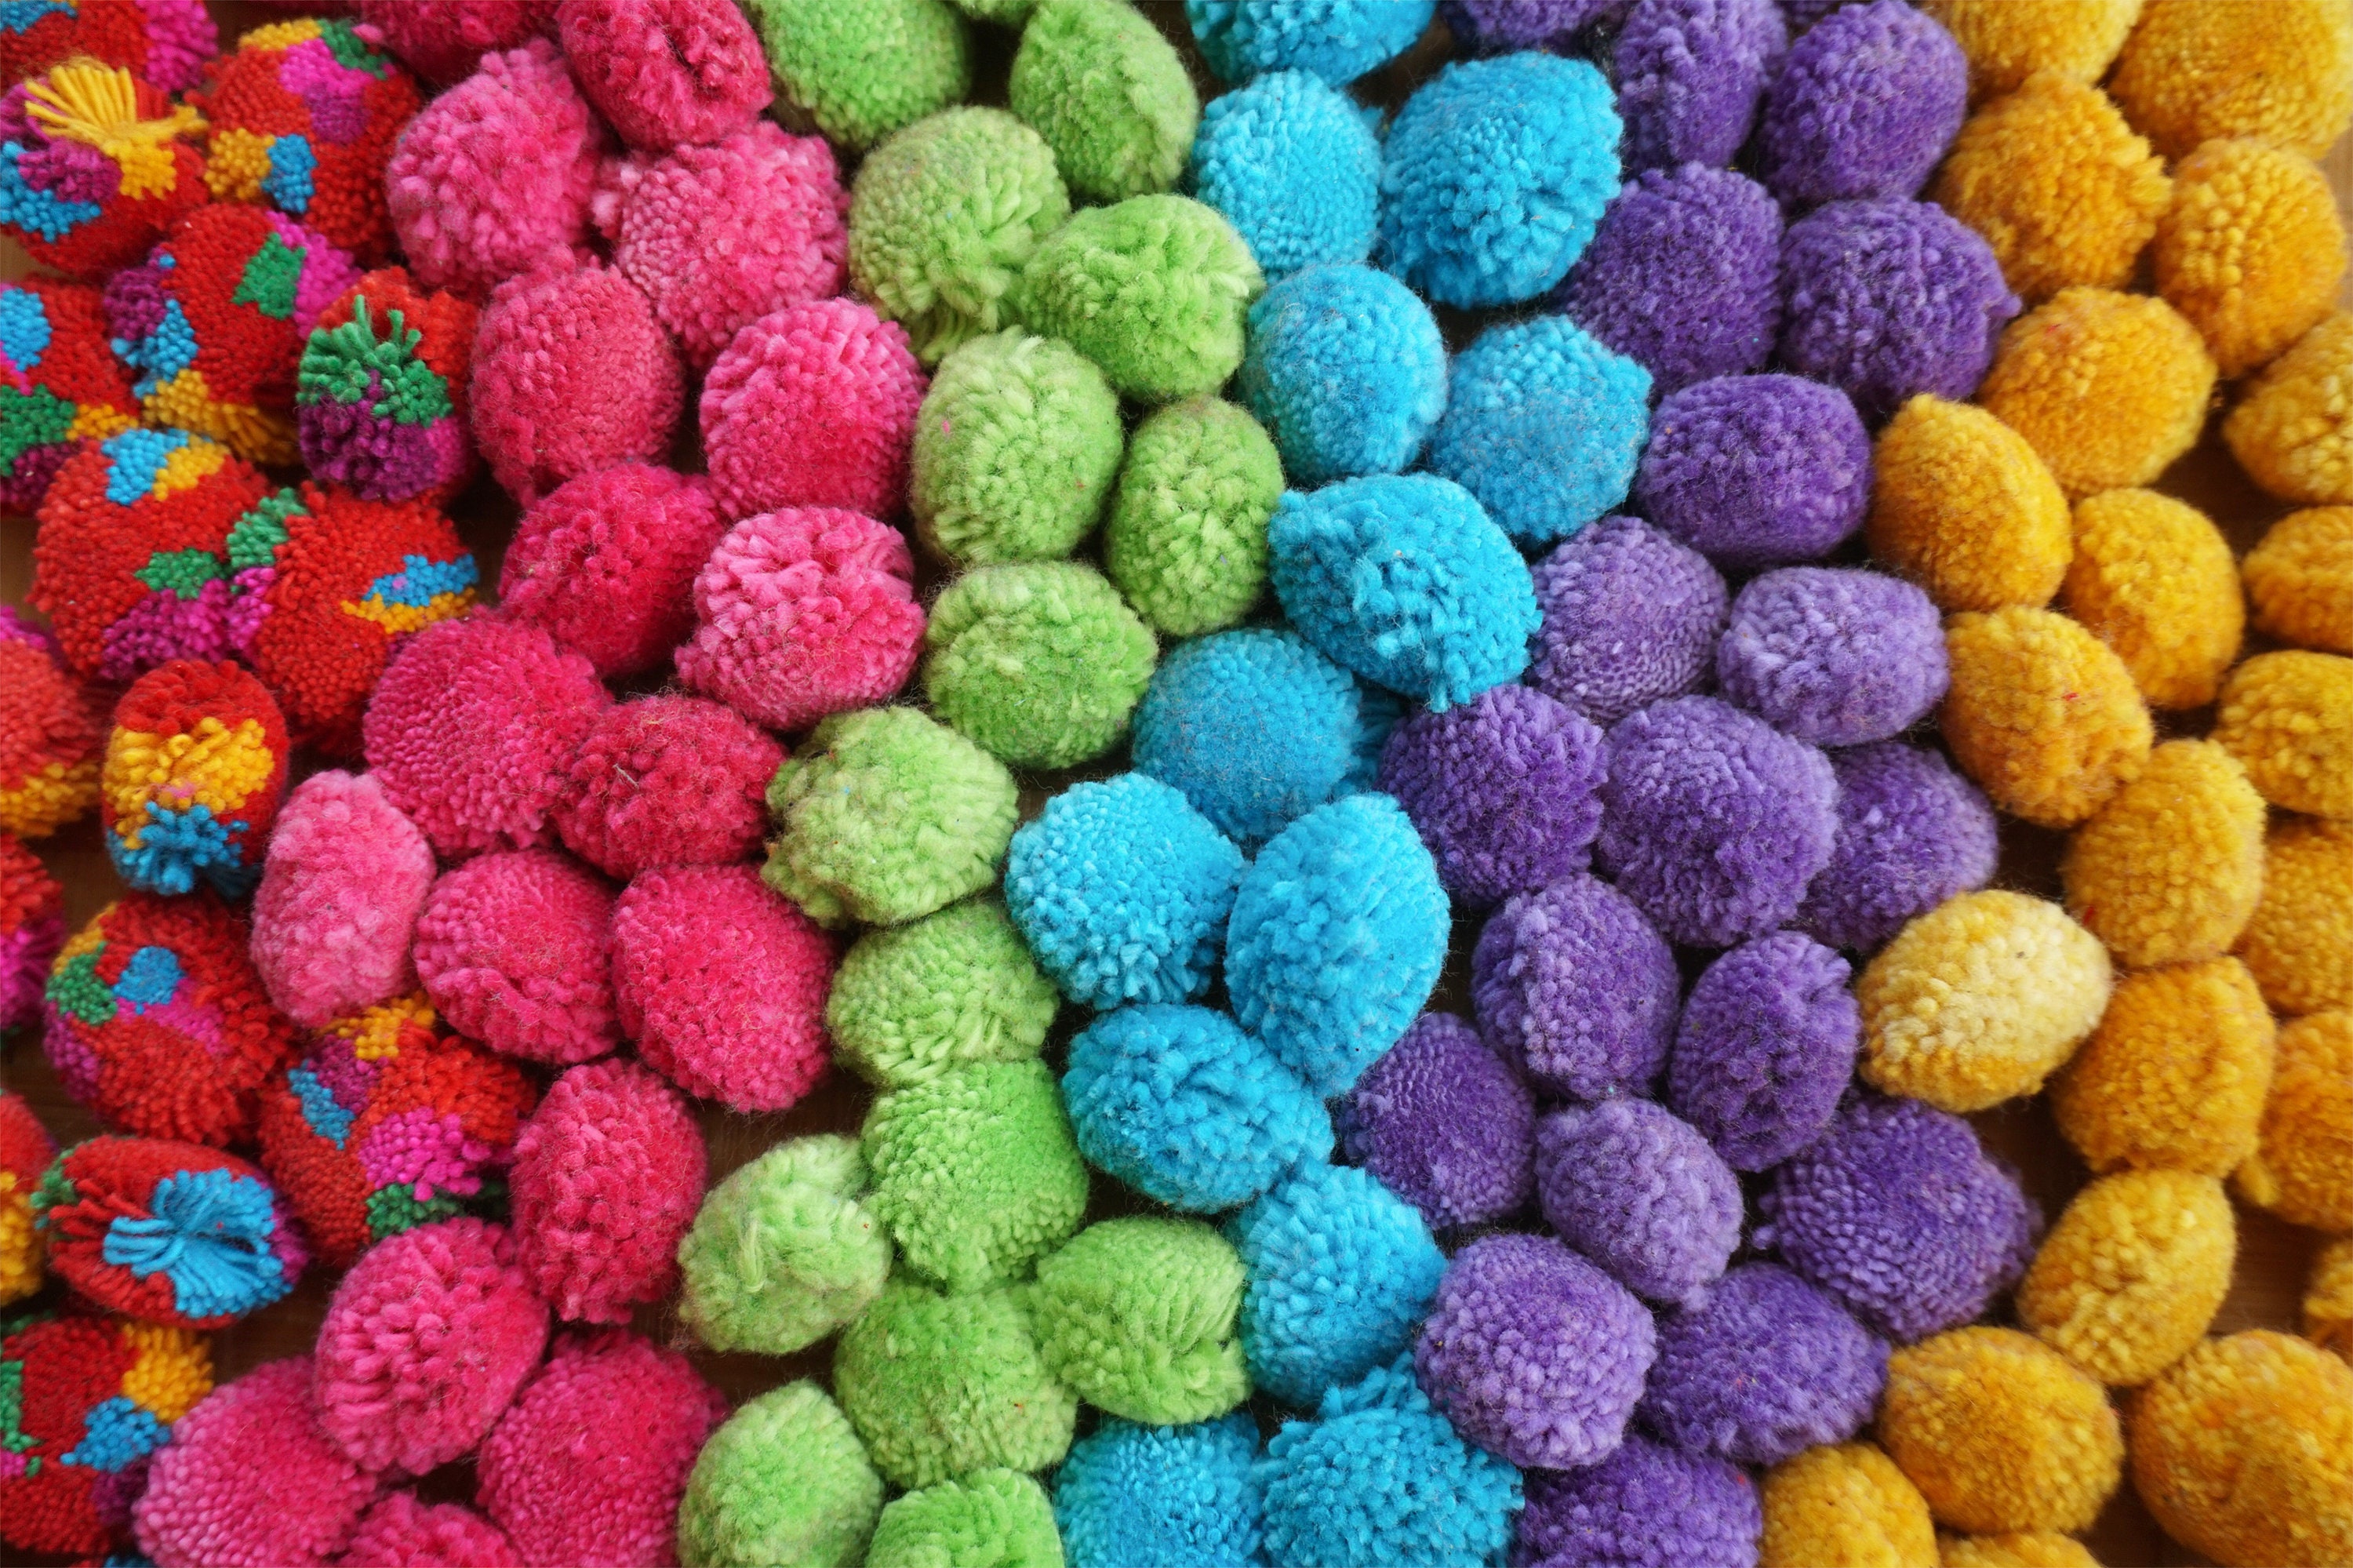 Pom Poms 400 Pieces 6 MM Tiny Balls for Crafts Choose Mixed Color